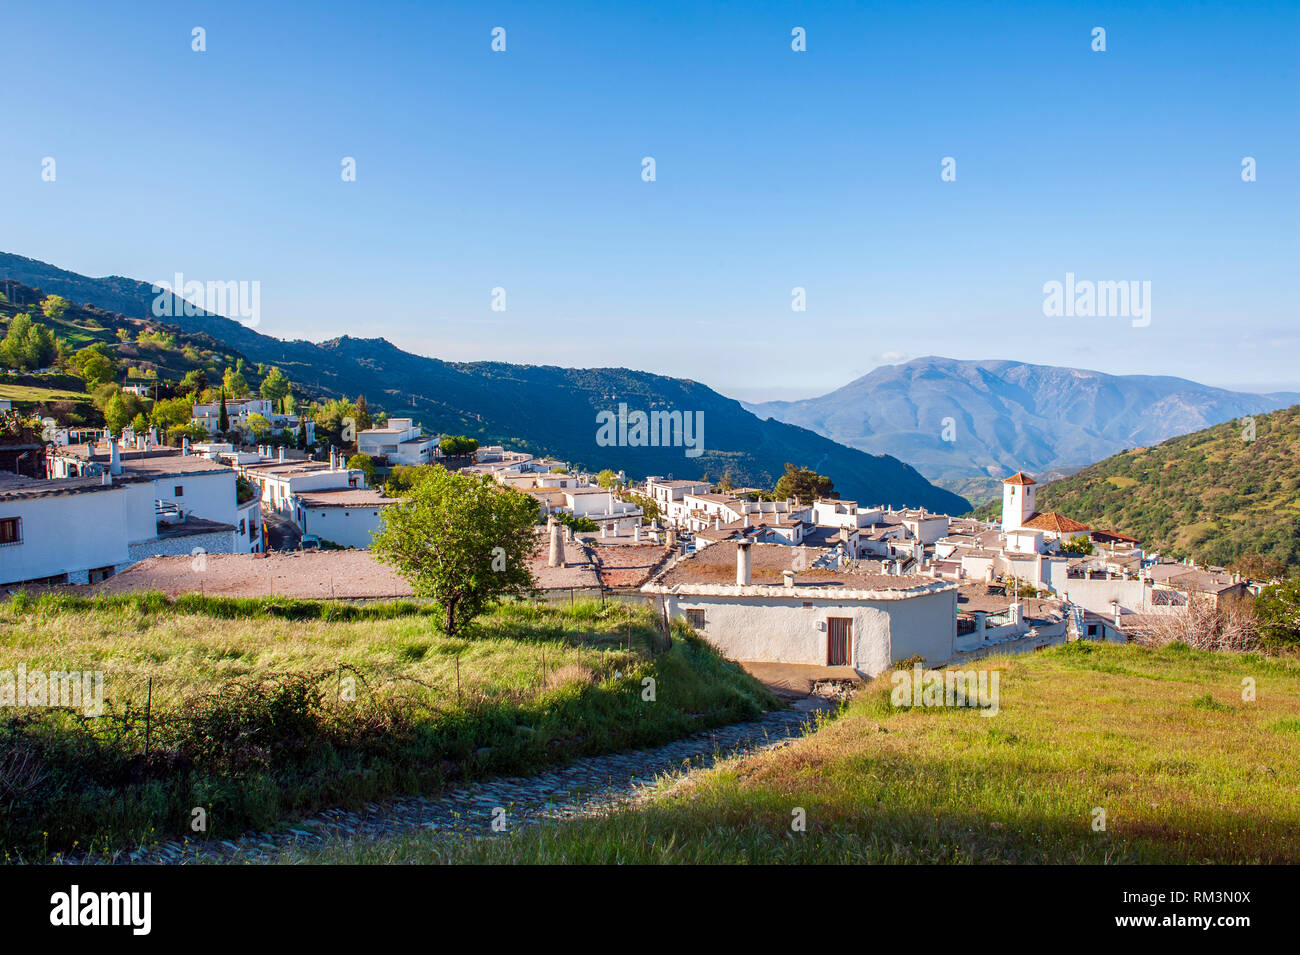 A view over Capileira, the highest and most northerly village in the Poqueira river gorge, in the Alpujarra region in the Sierra Nevada, Andalusia, Sp Stock Photo